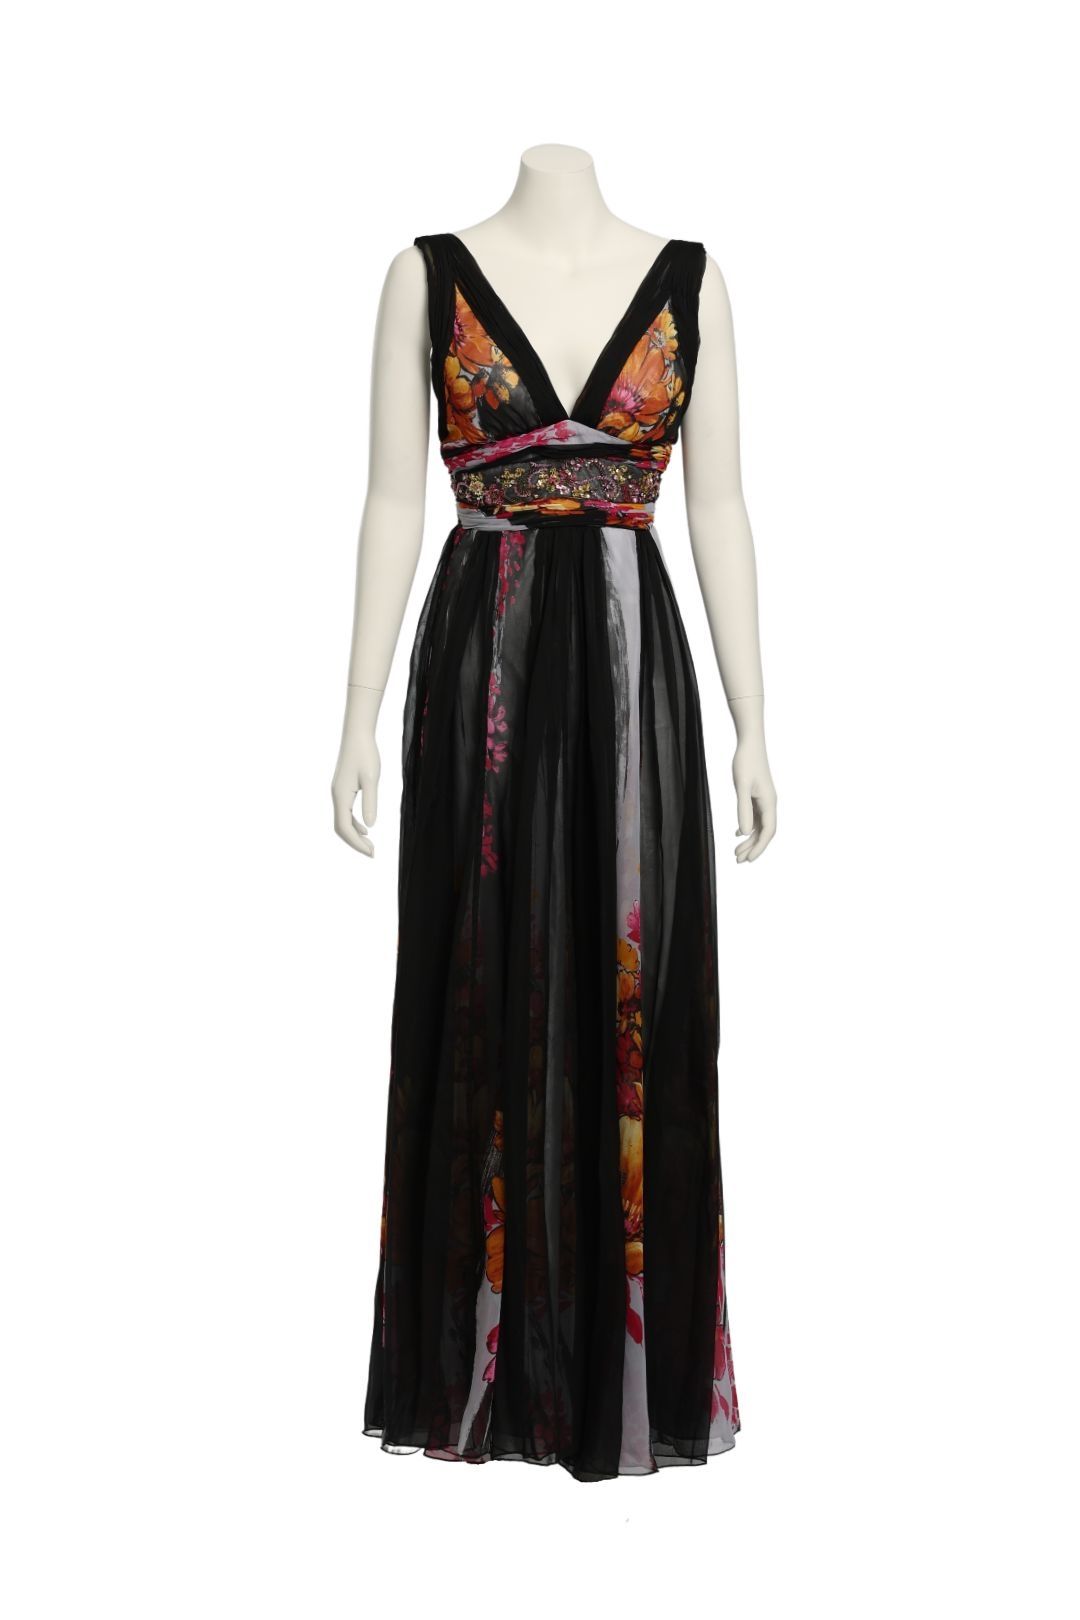 Evenings by Allure - Floral Chiffon Maxi Dress